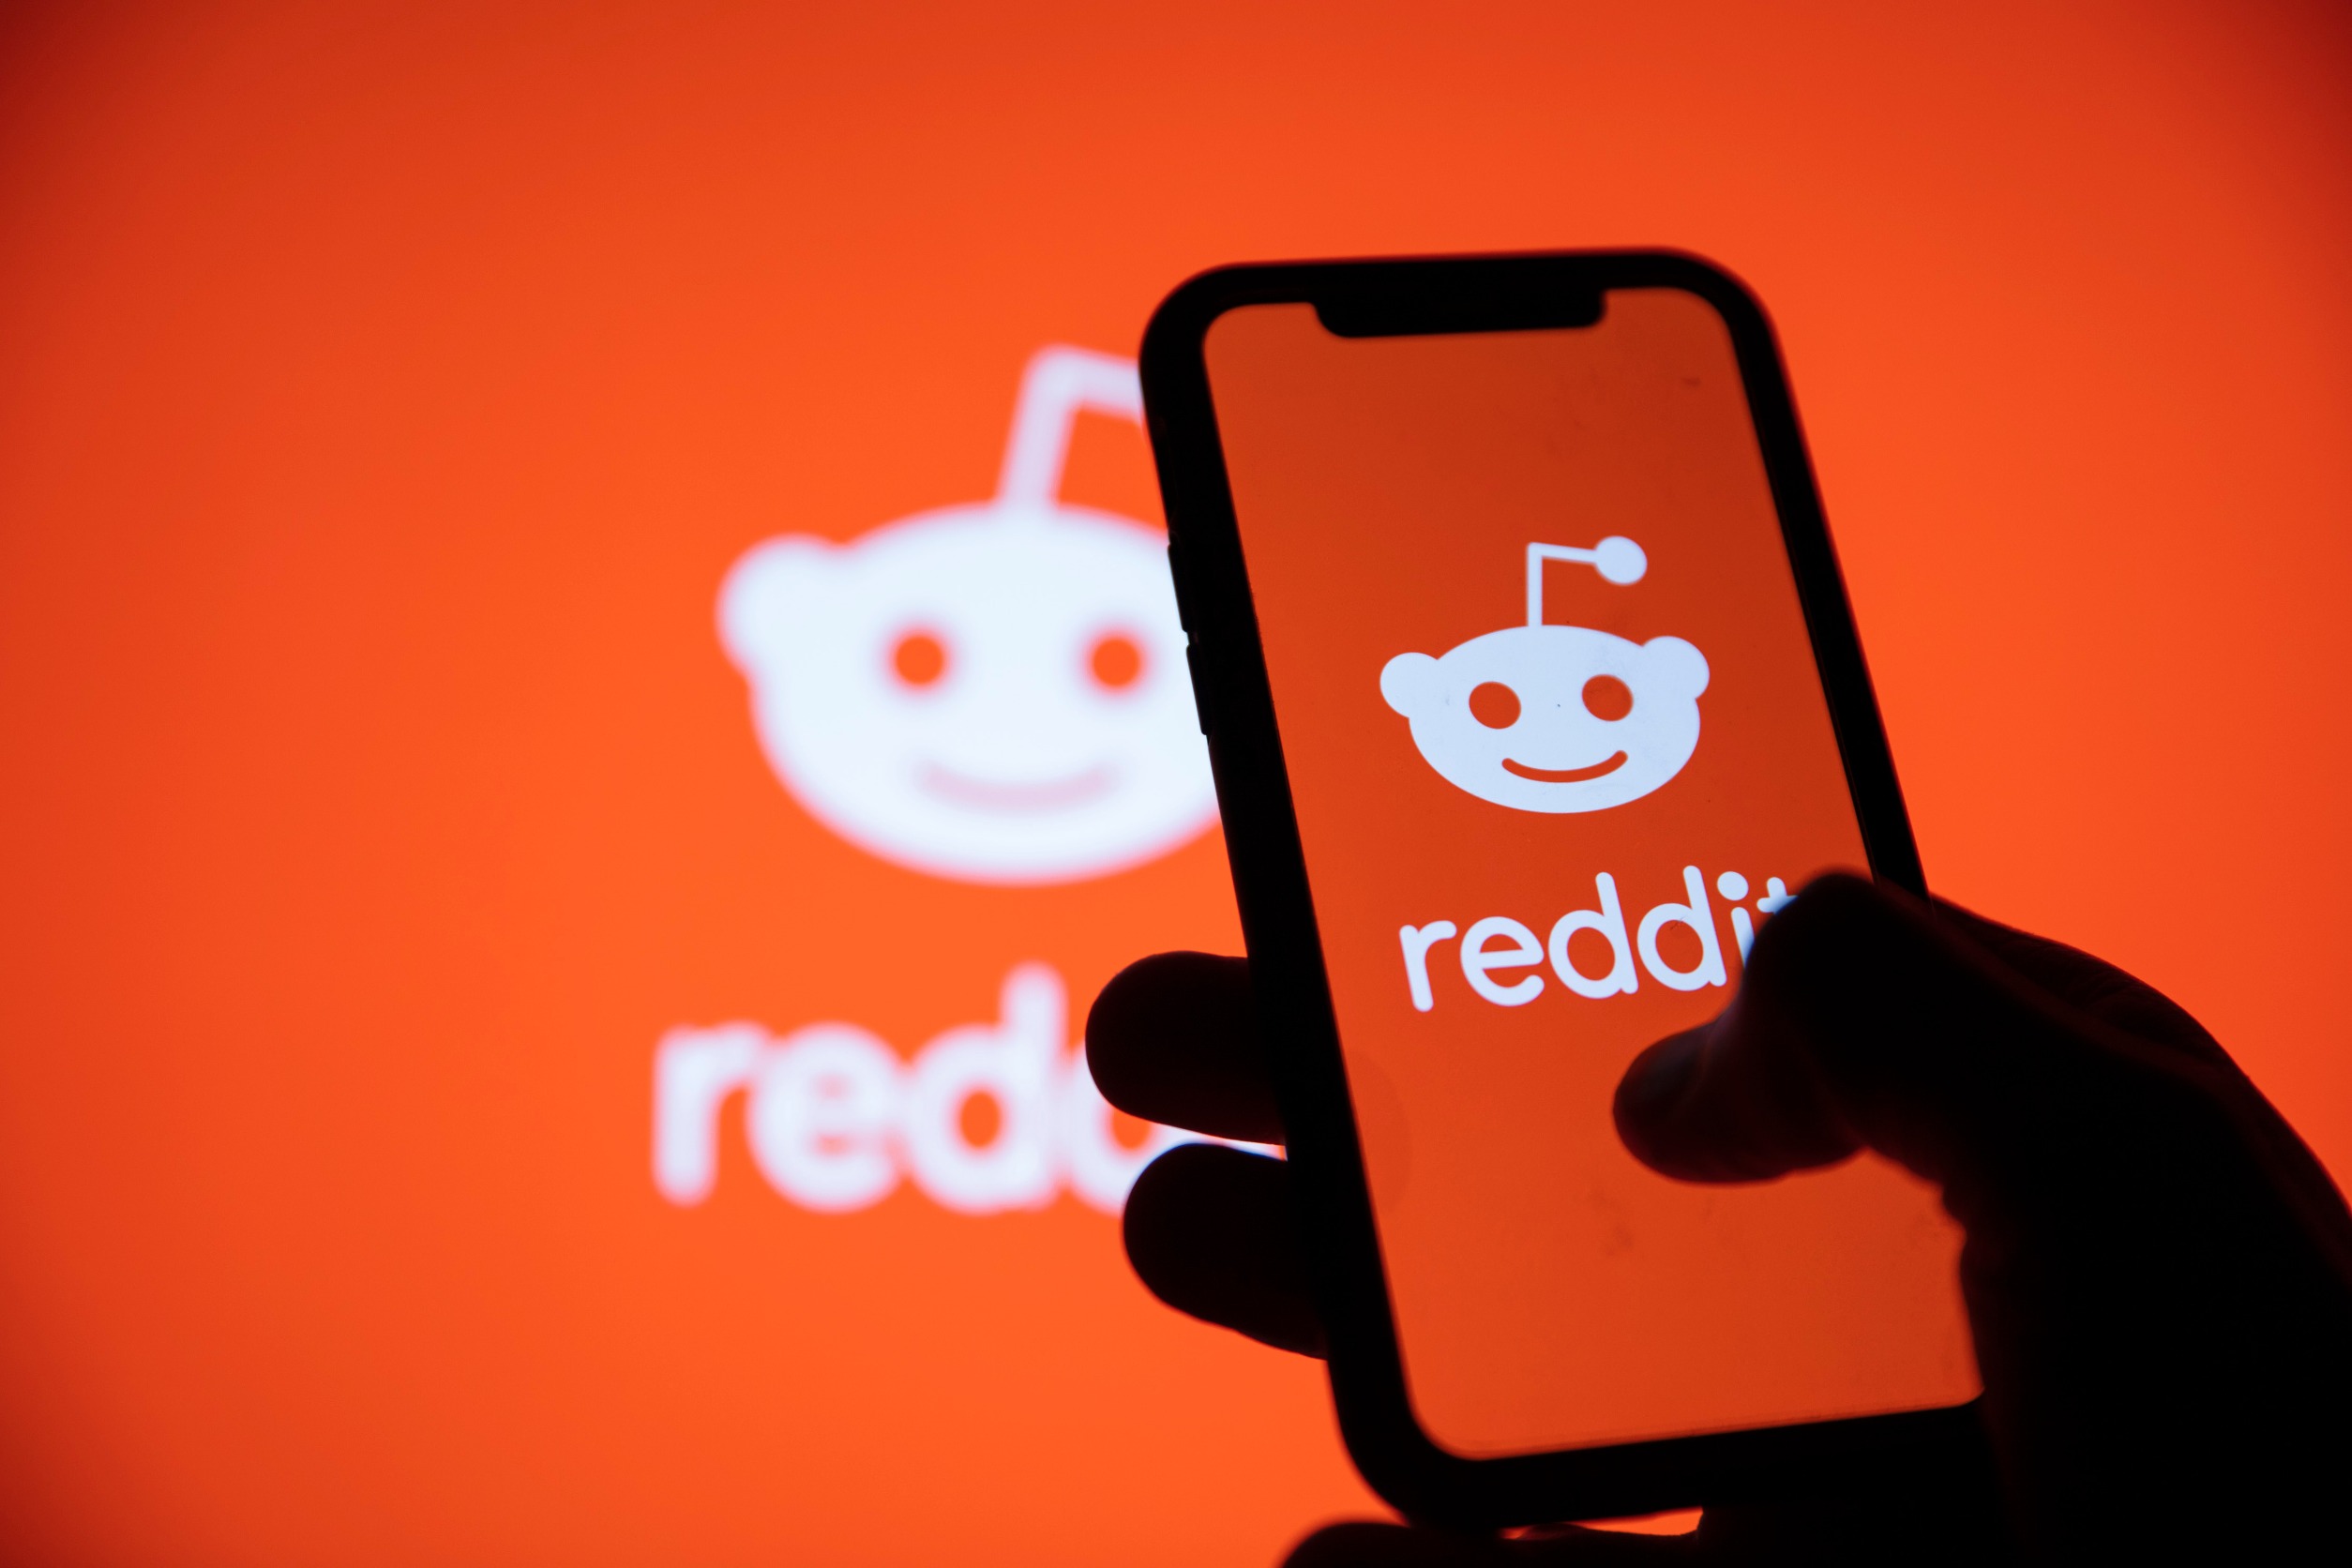 Hedgeye Claims Reddit is 'Grossly Overvalued', Insiders Sell Shares After IPO